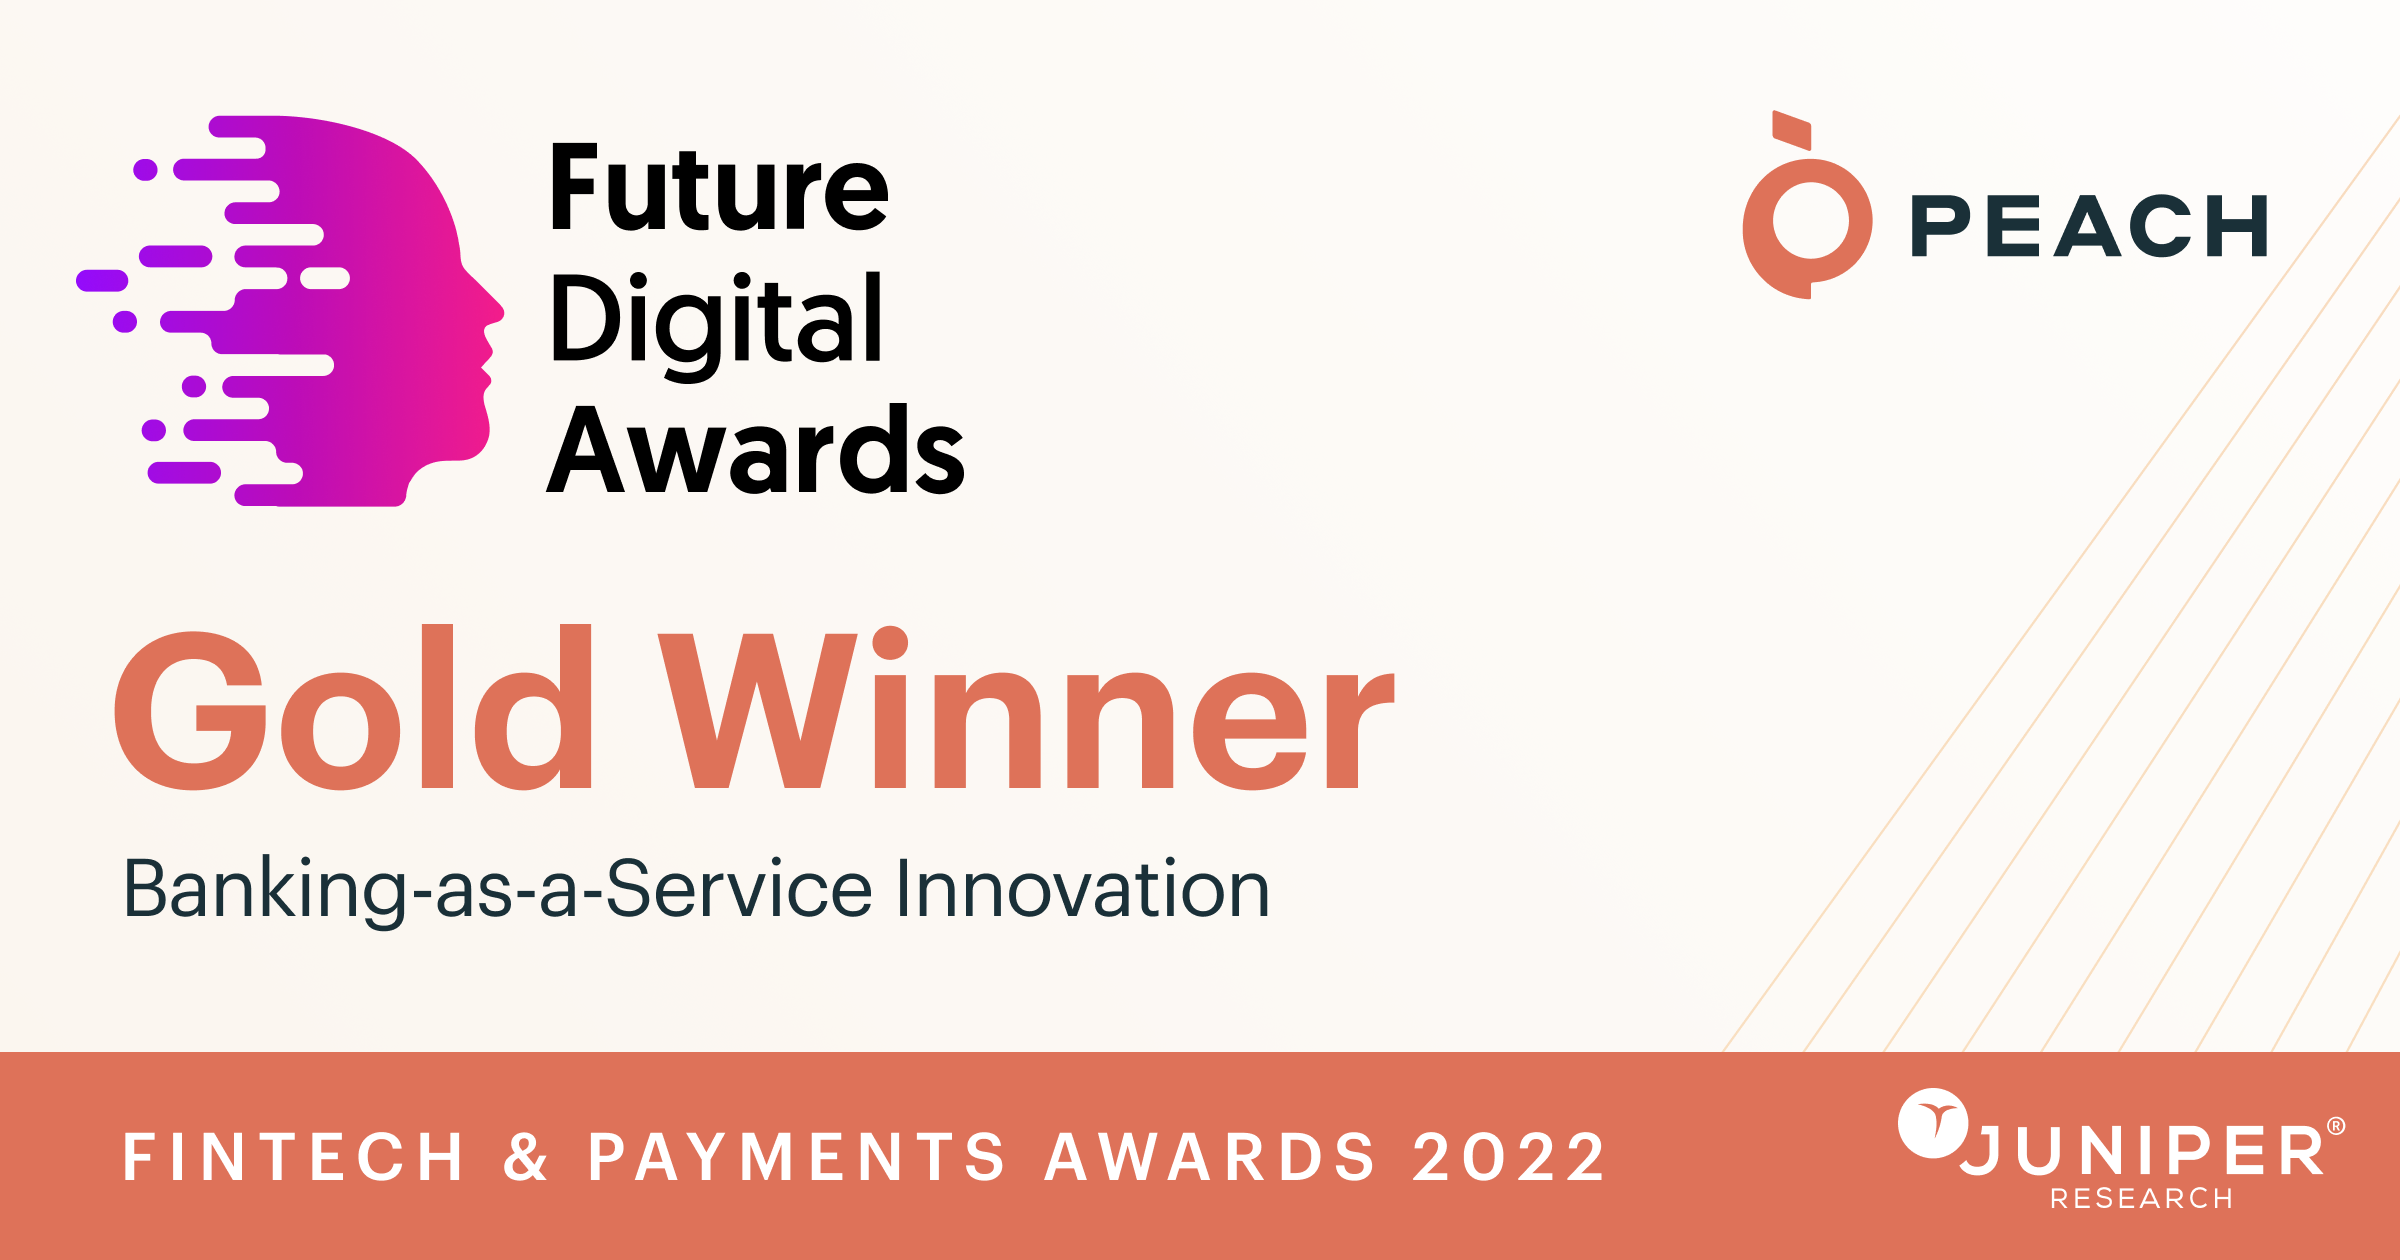 Peach is the 2022 Future Digital Awards Gold Winner for Banking-as-a-Service Innovation